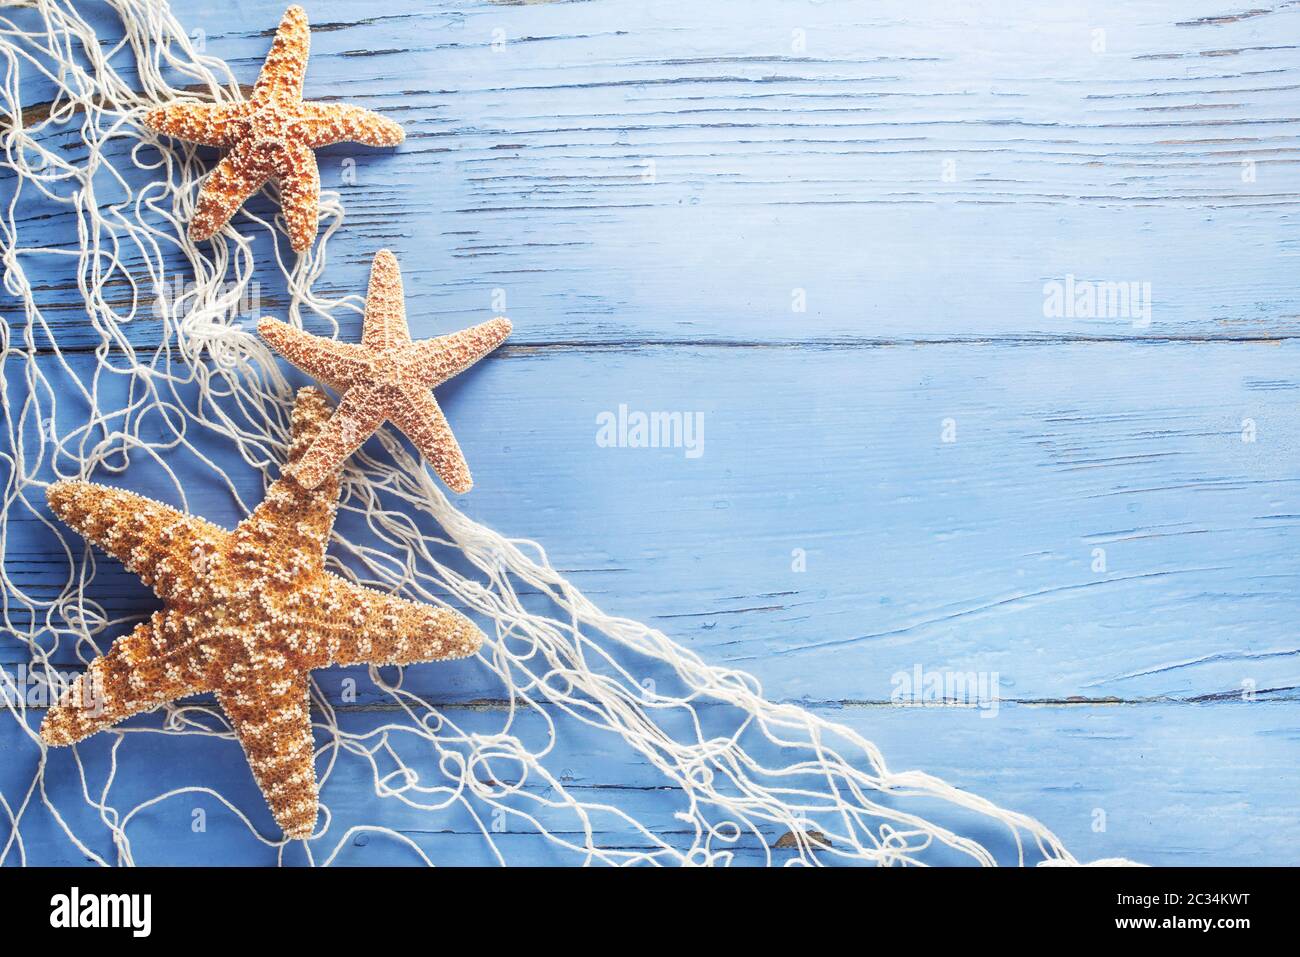 Maritime Background With Starfish And A Fishing Net Stock Photo